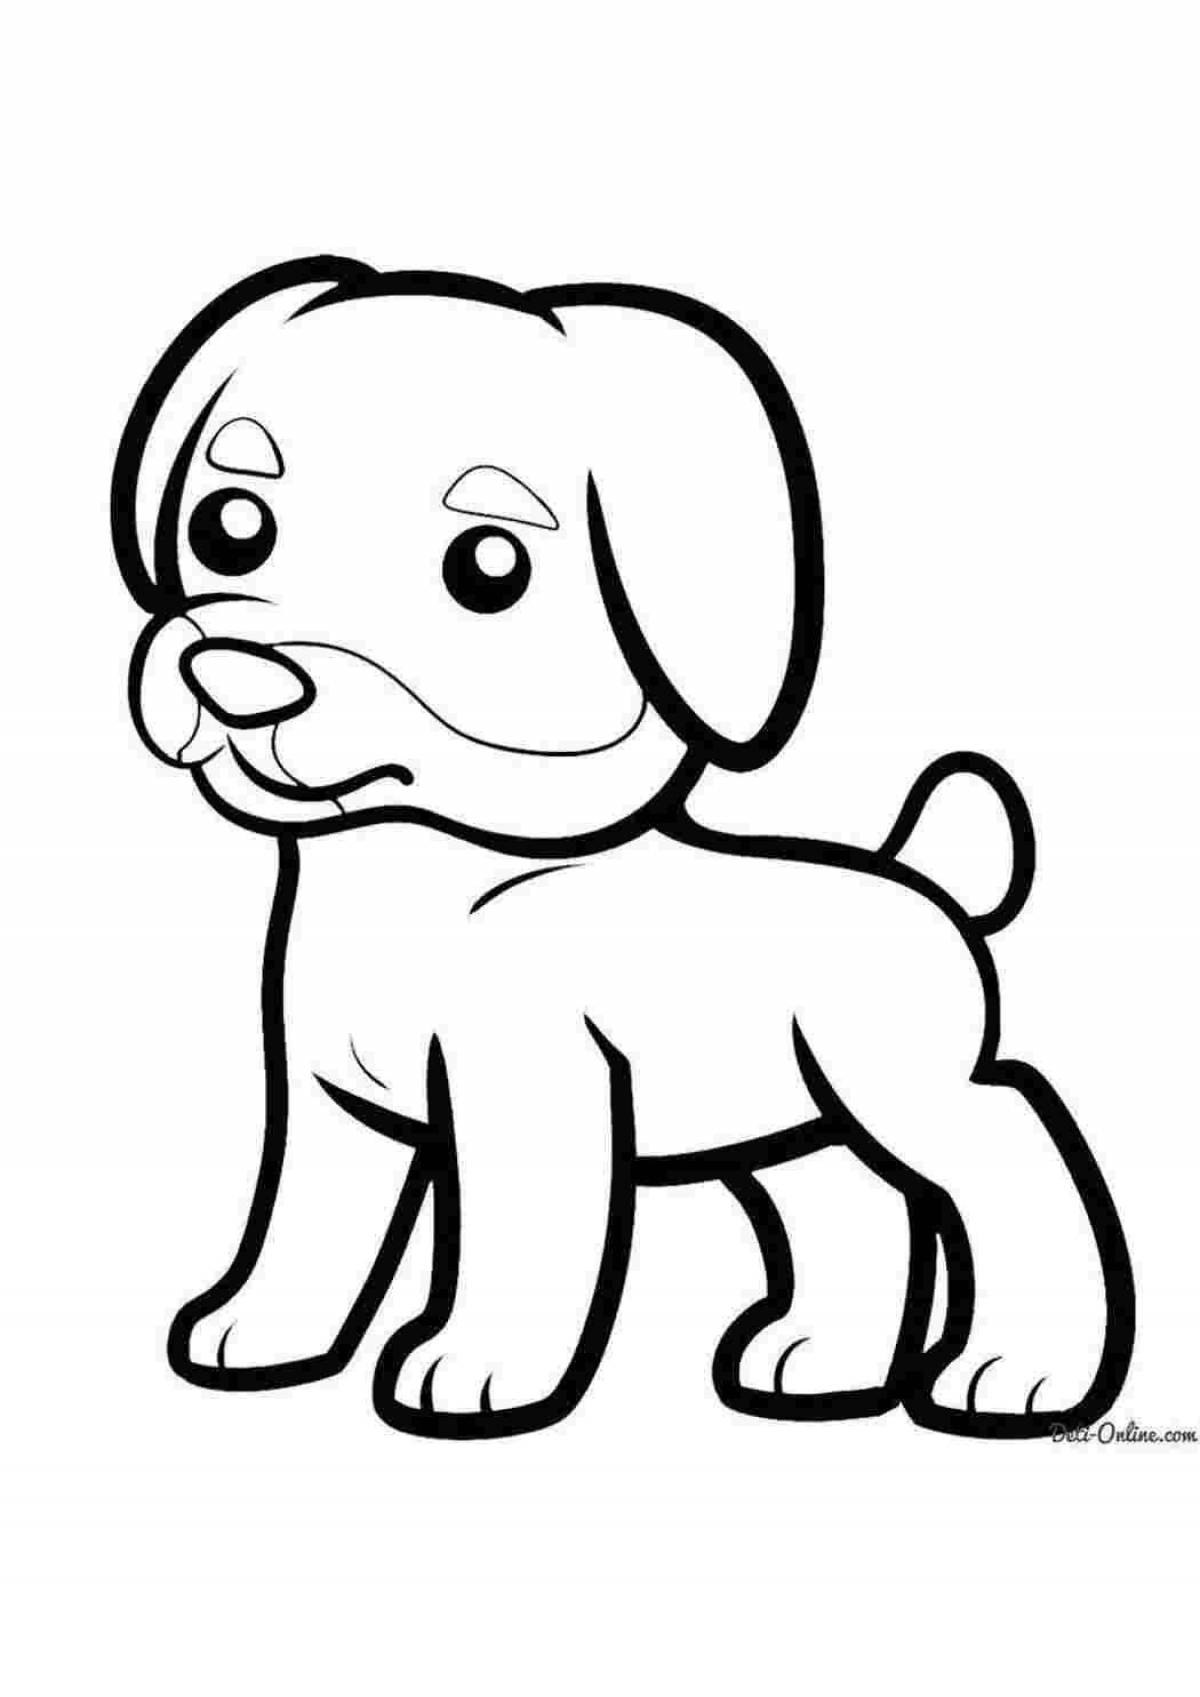 Violent black and white dogs coloring page